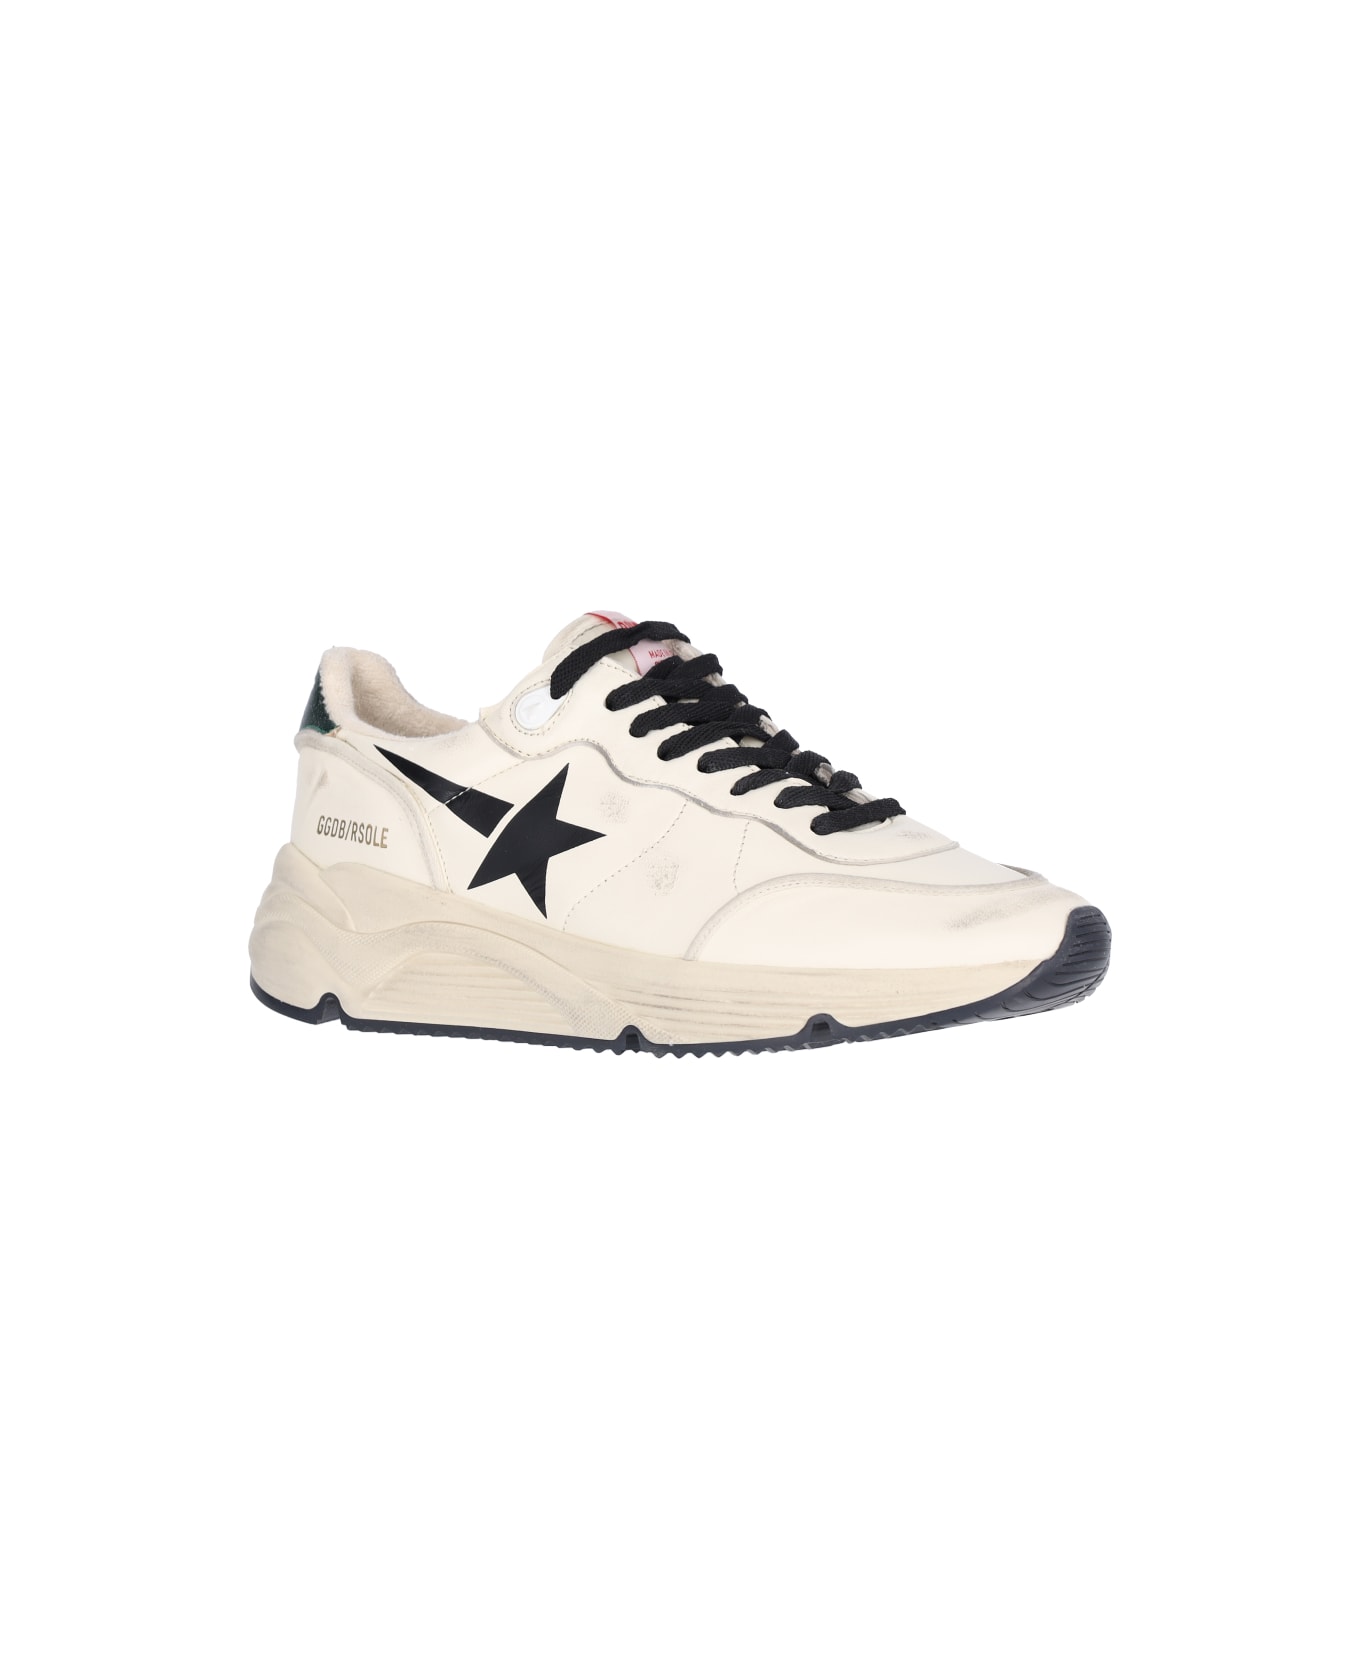 Golden Goose "running Sole" Sneakers - White